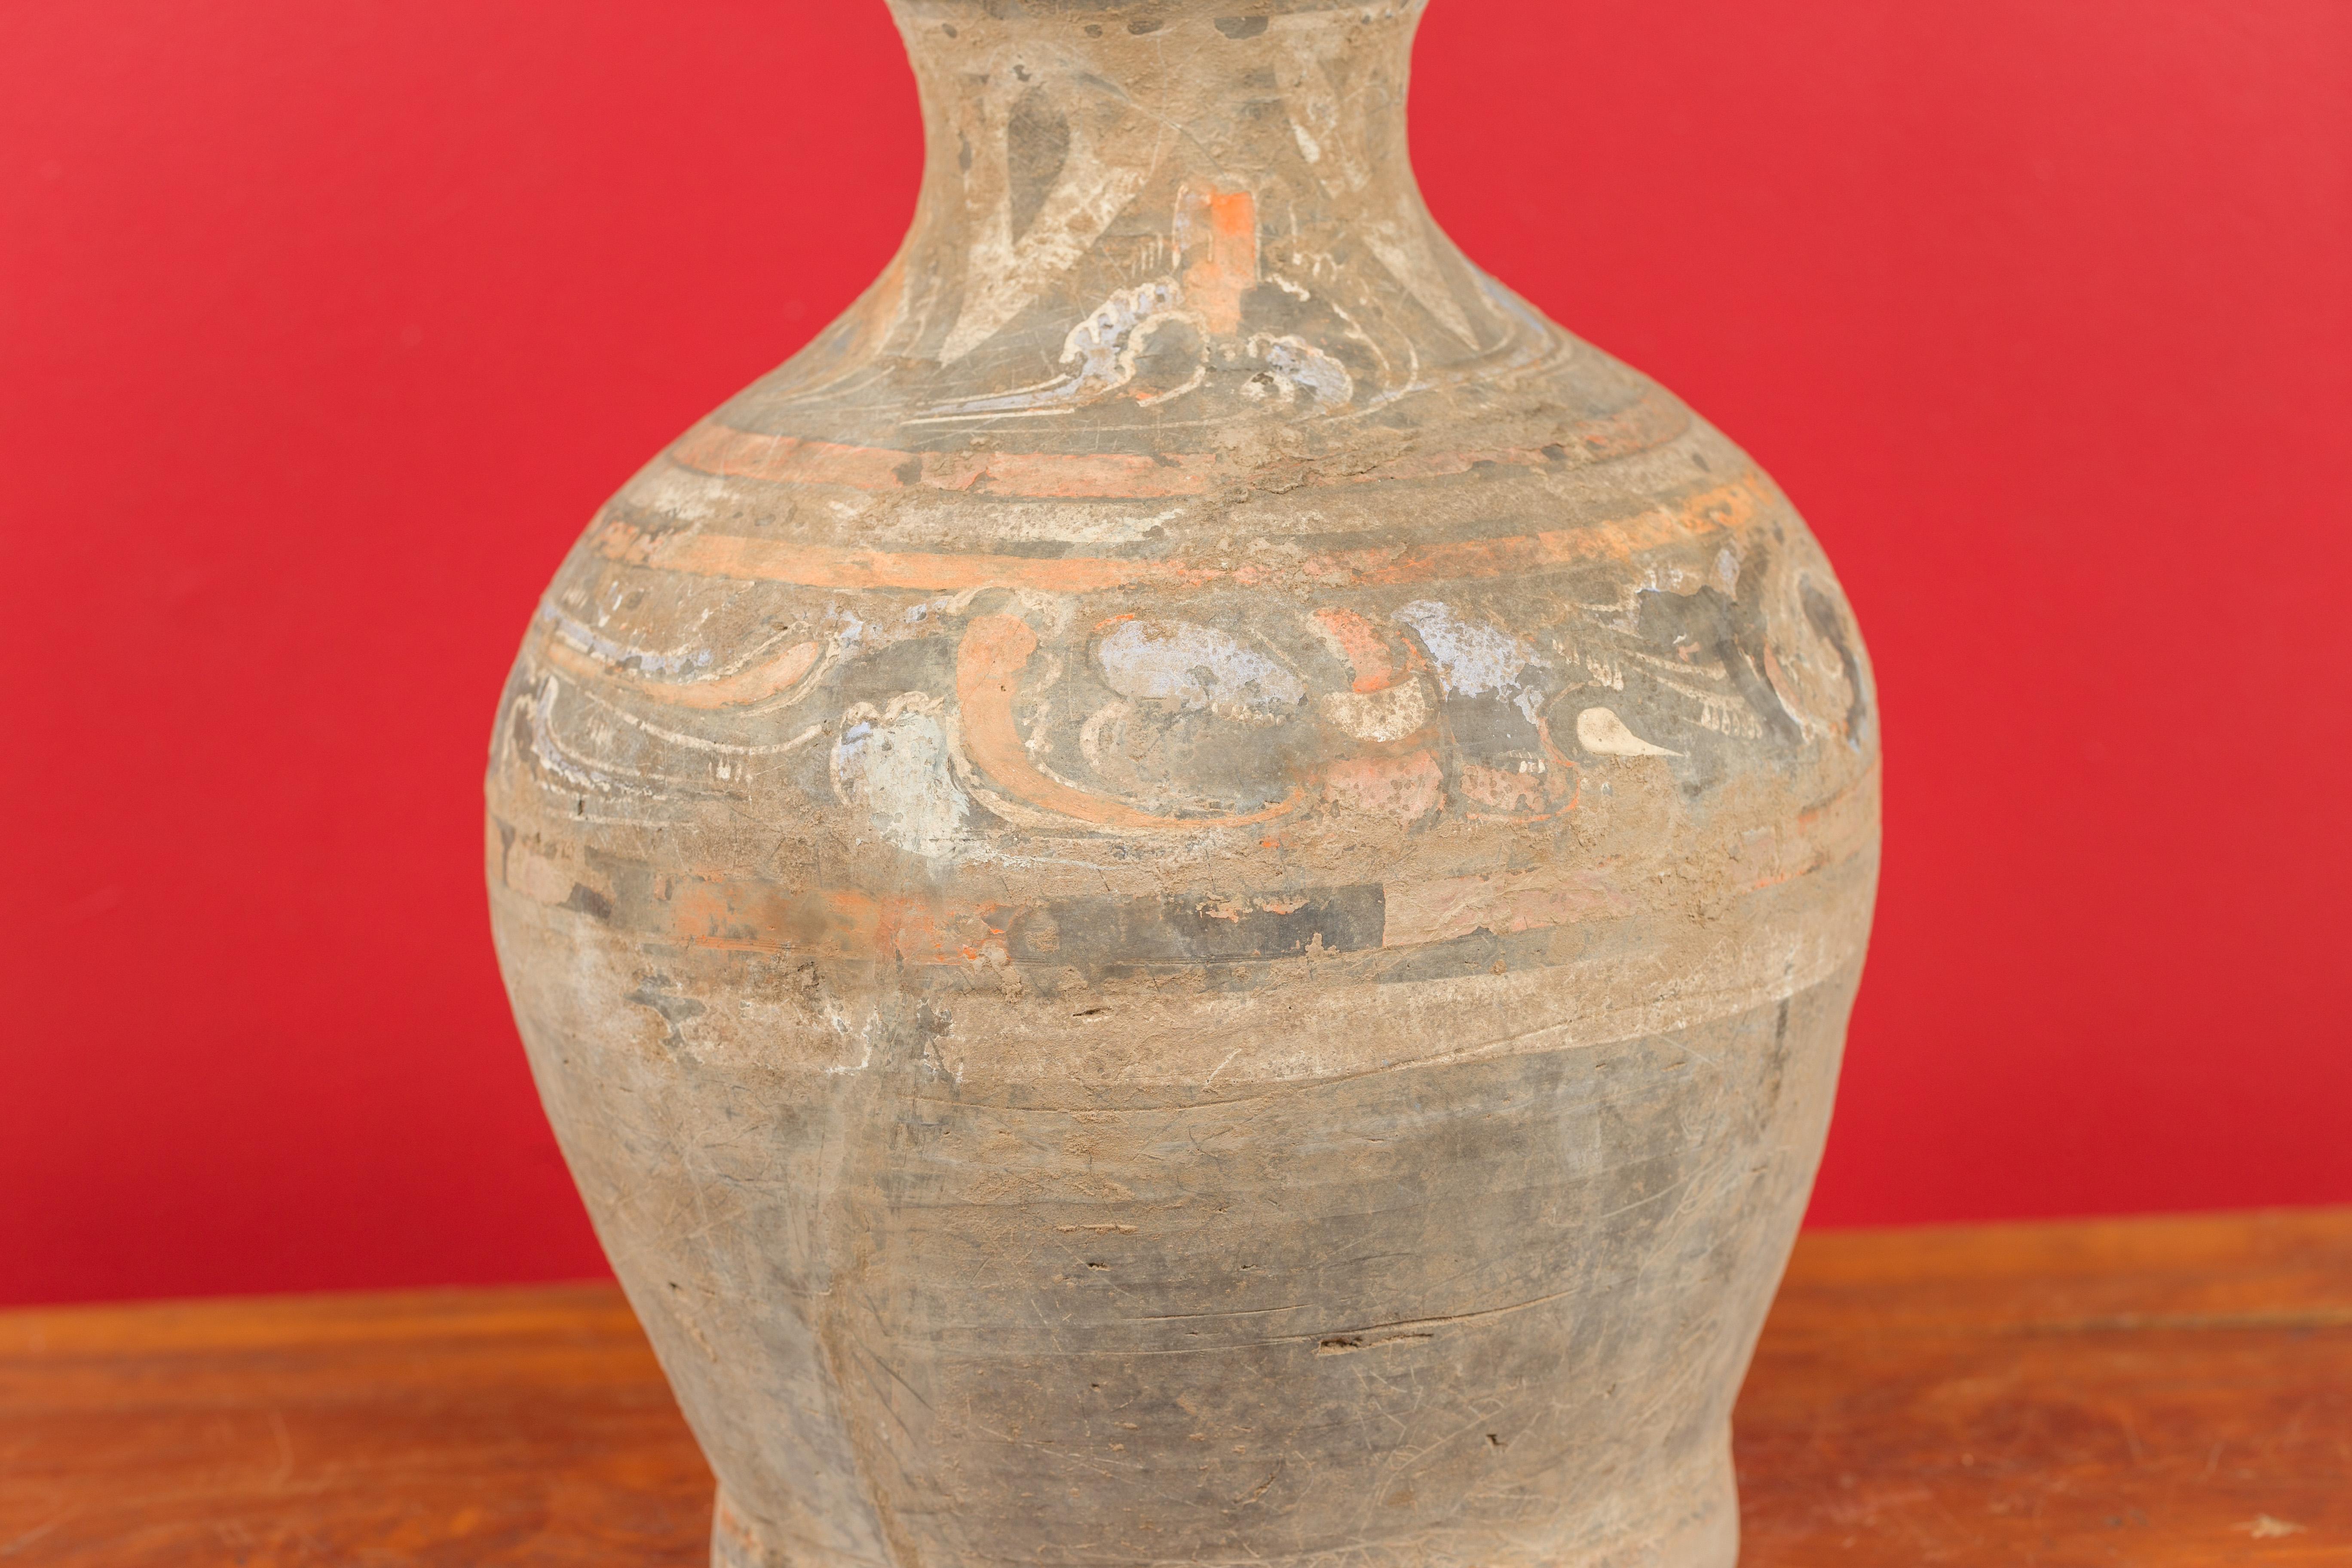 Chinese Han Dynasty Terracotta Hu Vessel with Original Paint circa 202 BC-200 AD 6